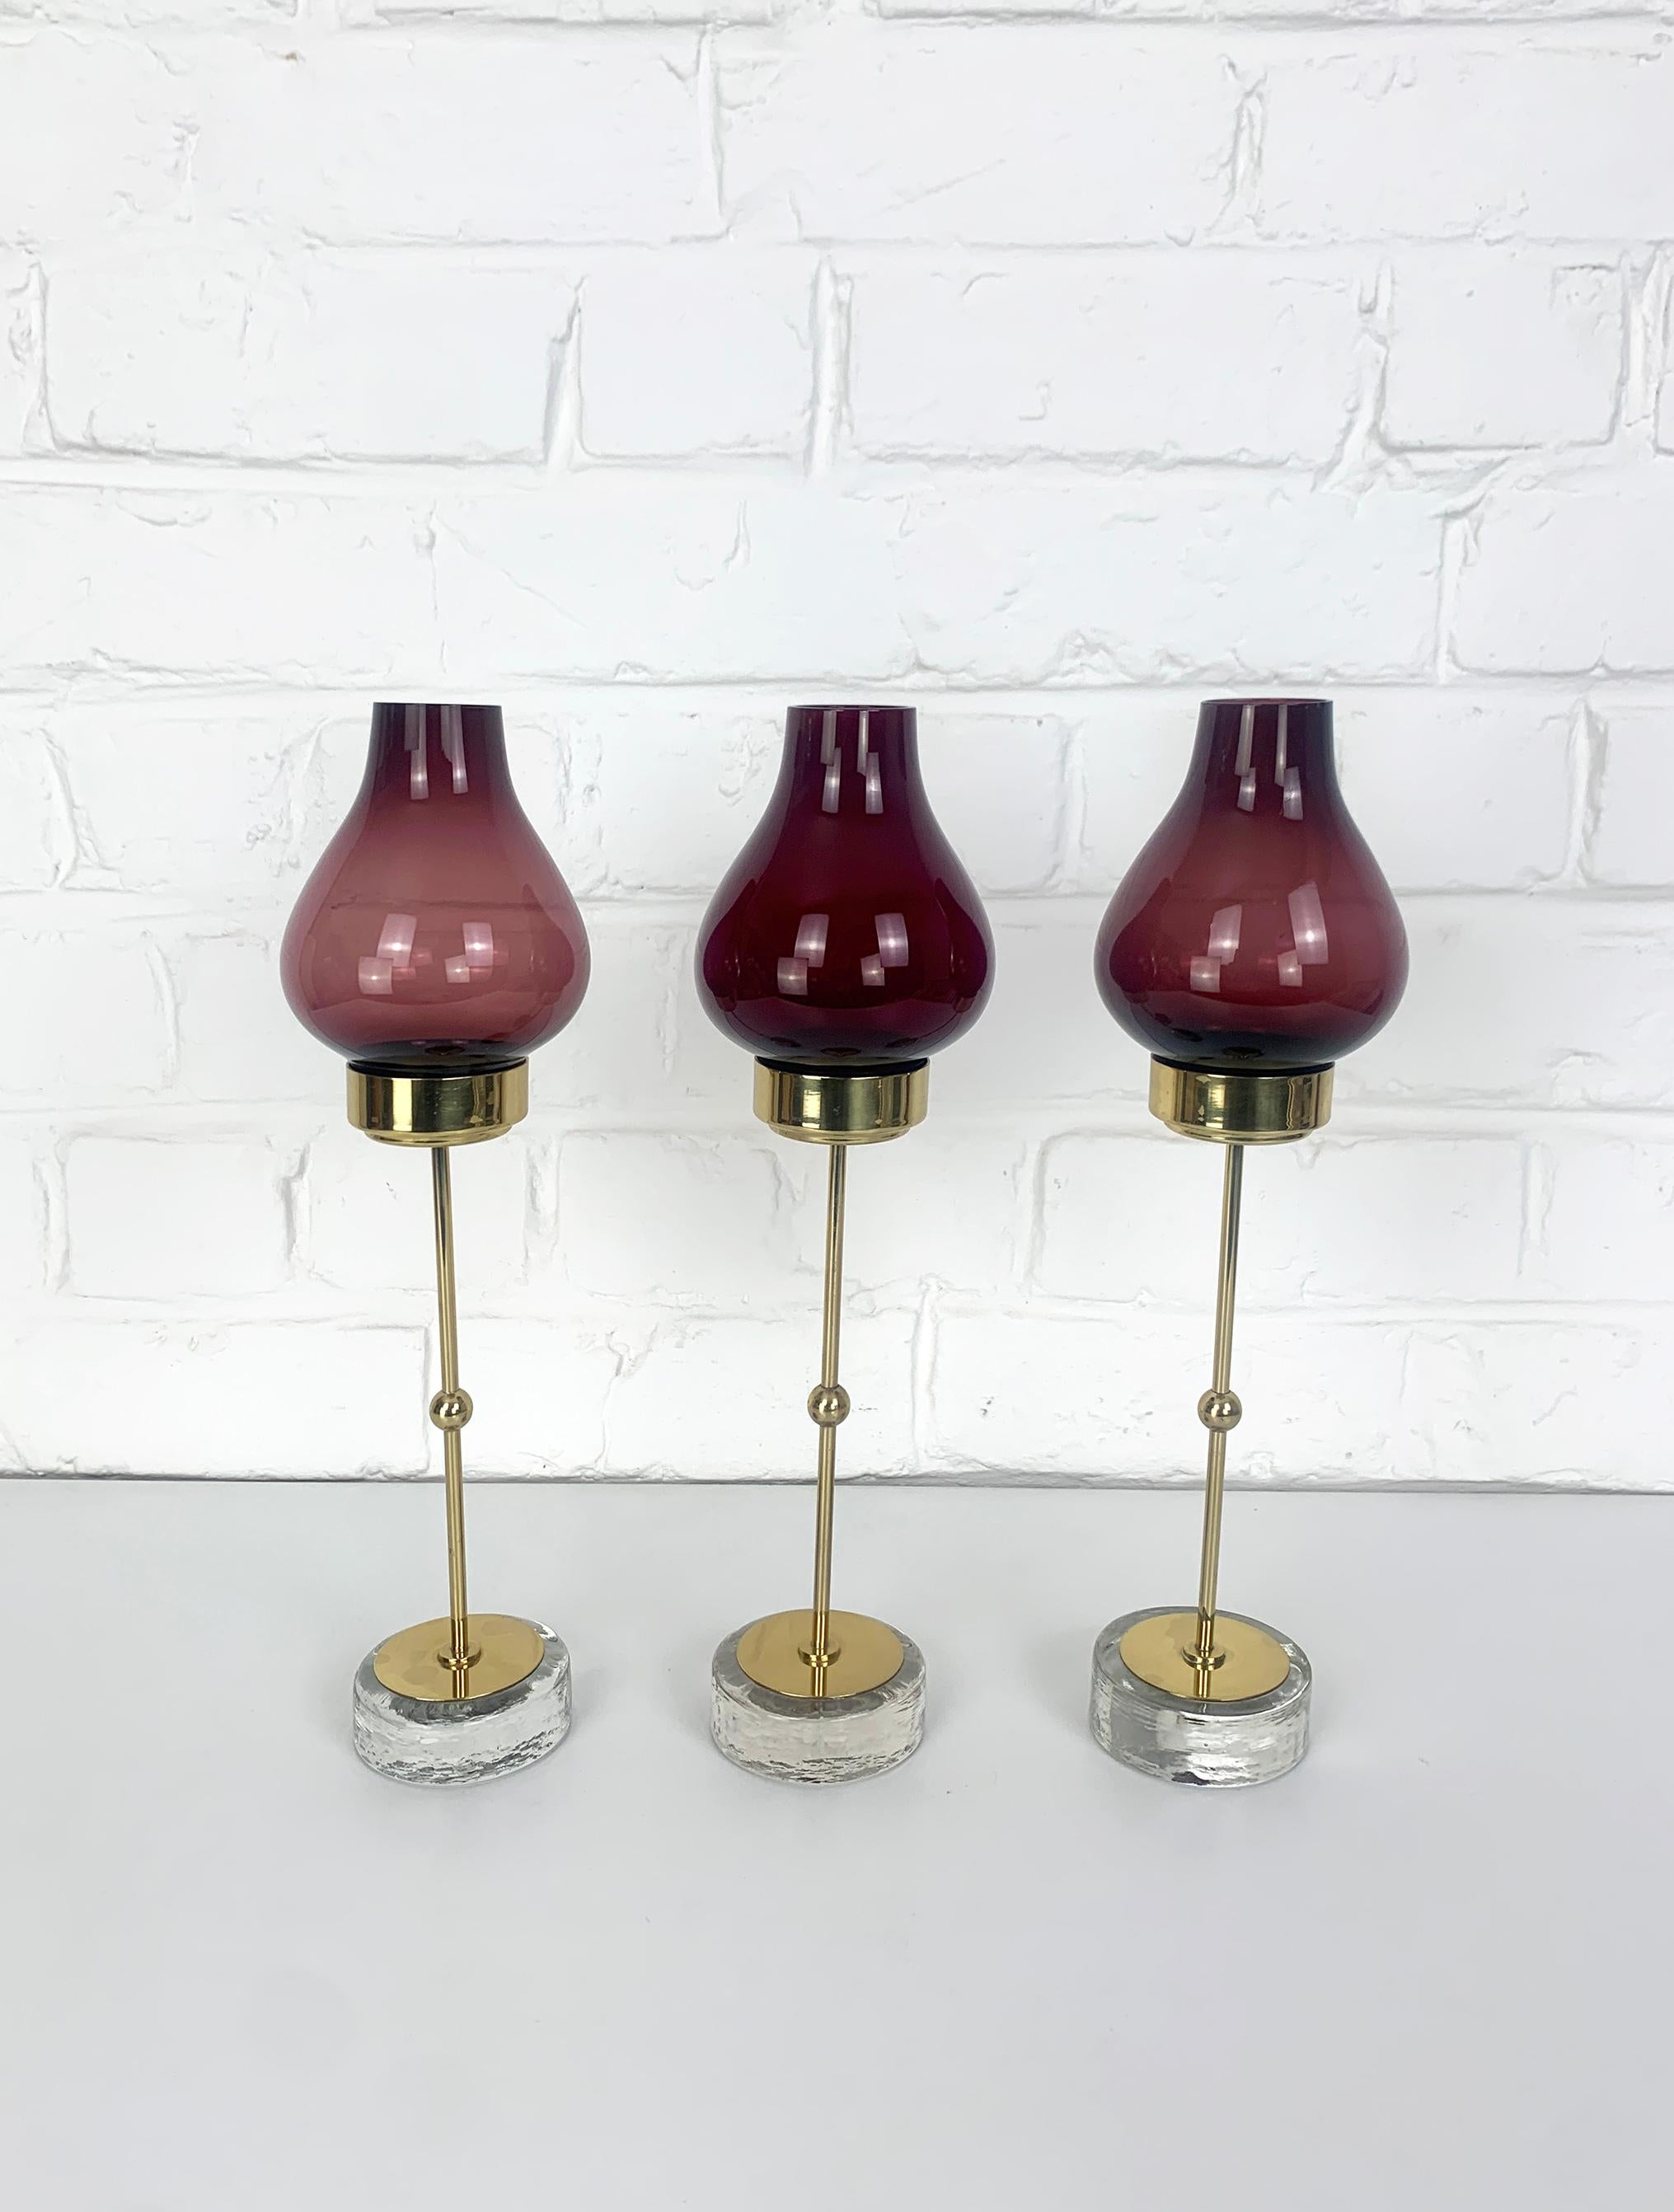 Set of 3 Swedish Modernist candle holders by Gunnar Ander. Produced by Ystad-Metall, located in the town of Ystad in Sweden. 

Candle-holders in solid, polished brass on a base of clear glass with an irregular surface pattern. Glas shades in